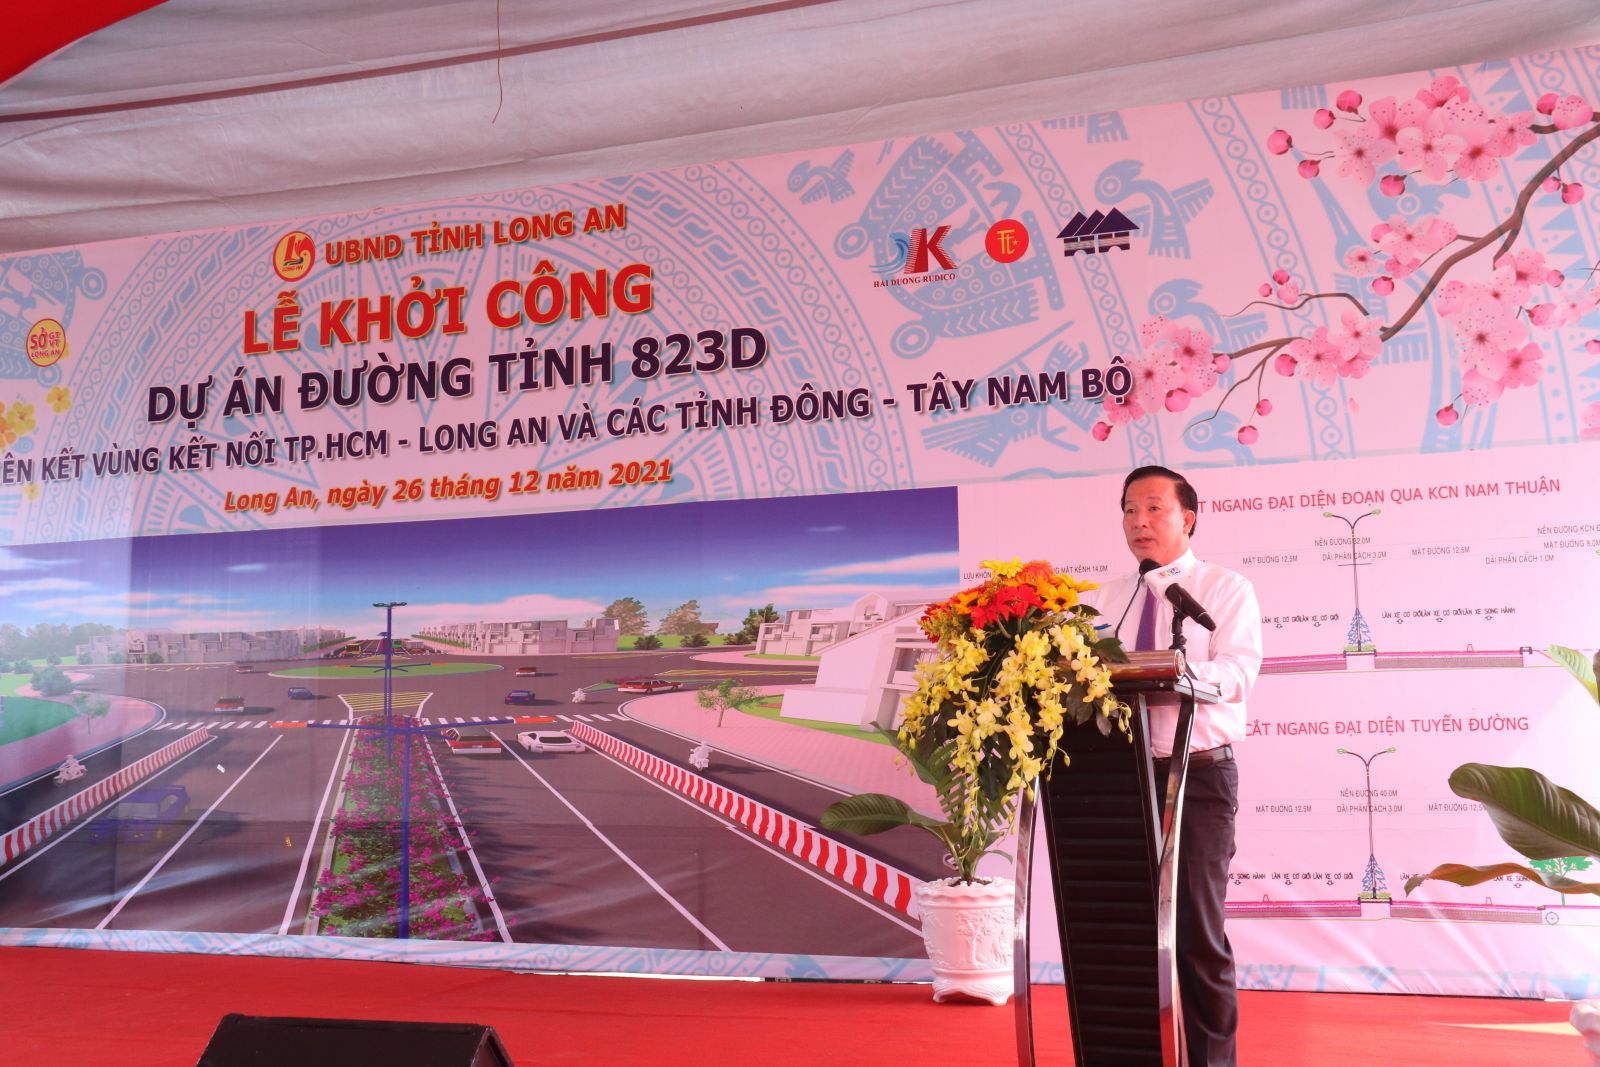 Chairman of the Provincial People's Committee - Nguyen Van Ut emphasized that PR 823D project will be an important highlight for Long An province when it is completed